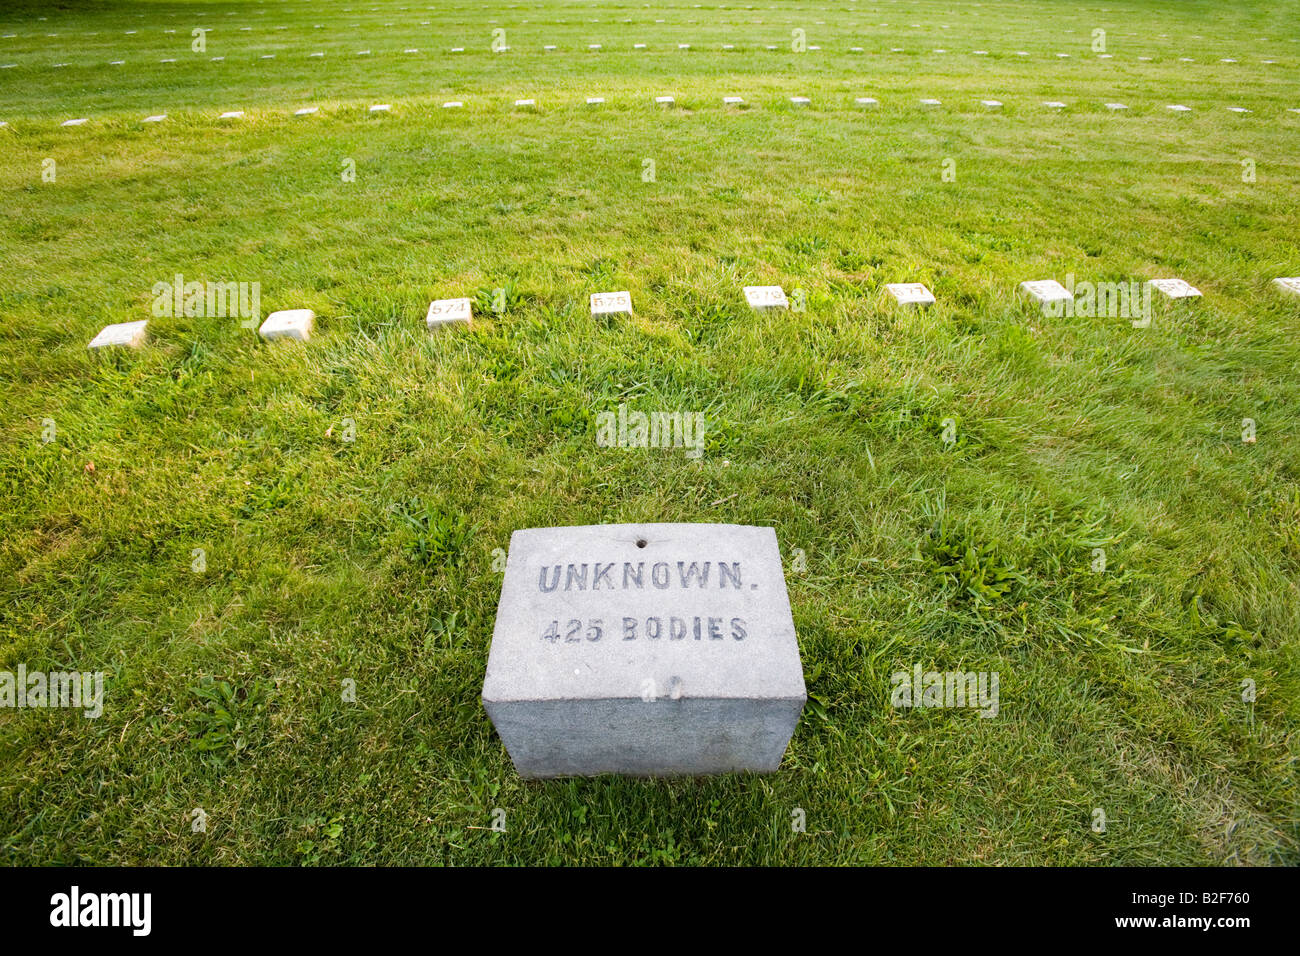 The National Cemetery in Gettysburg A view of unknown soldier grave markers Stock Photo